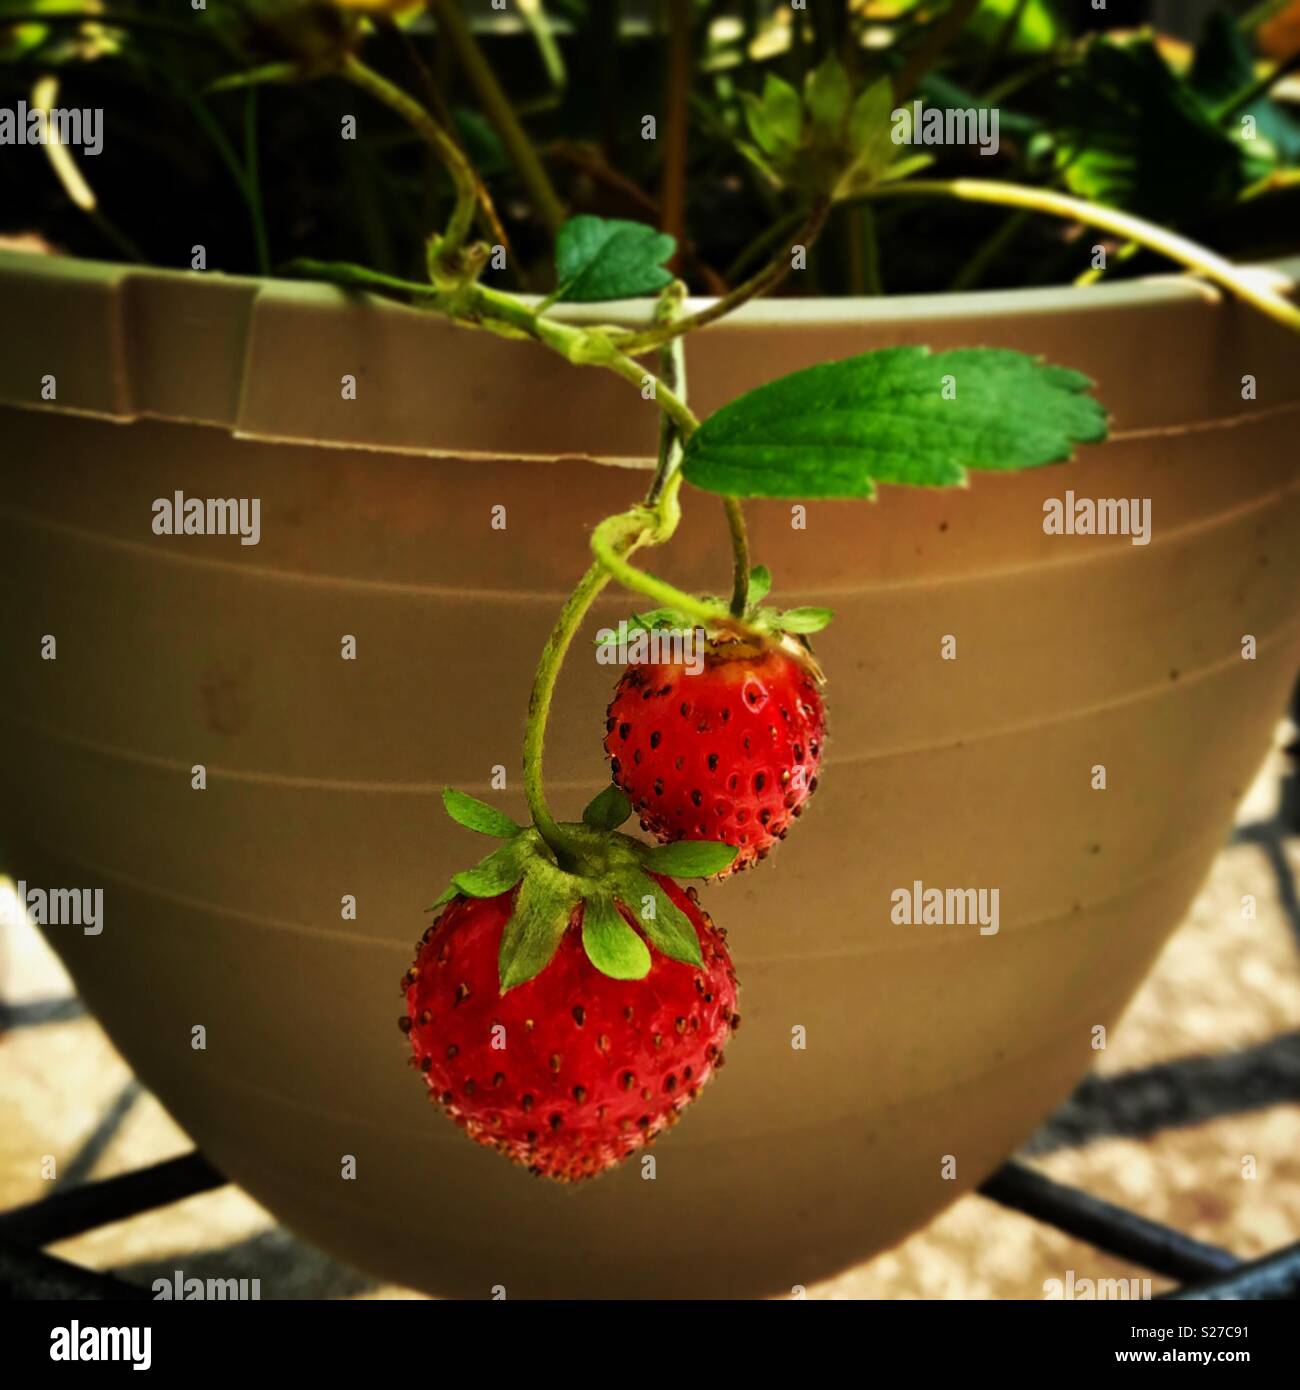 Two red strawberries on the strawberry plant in a pot Stock Photo